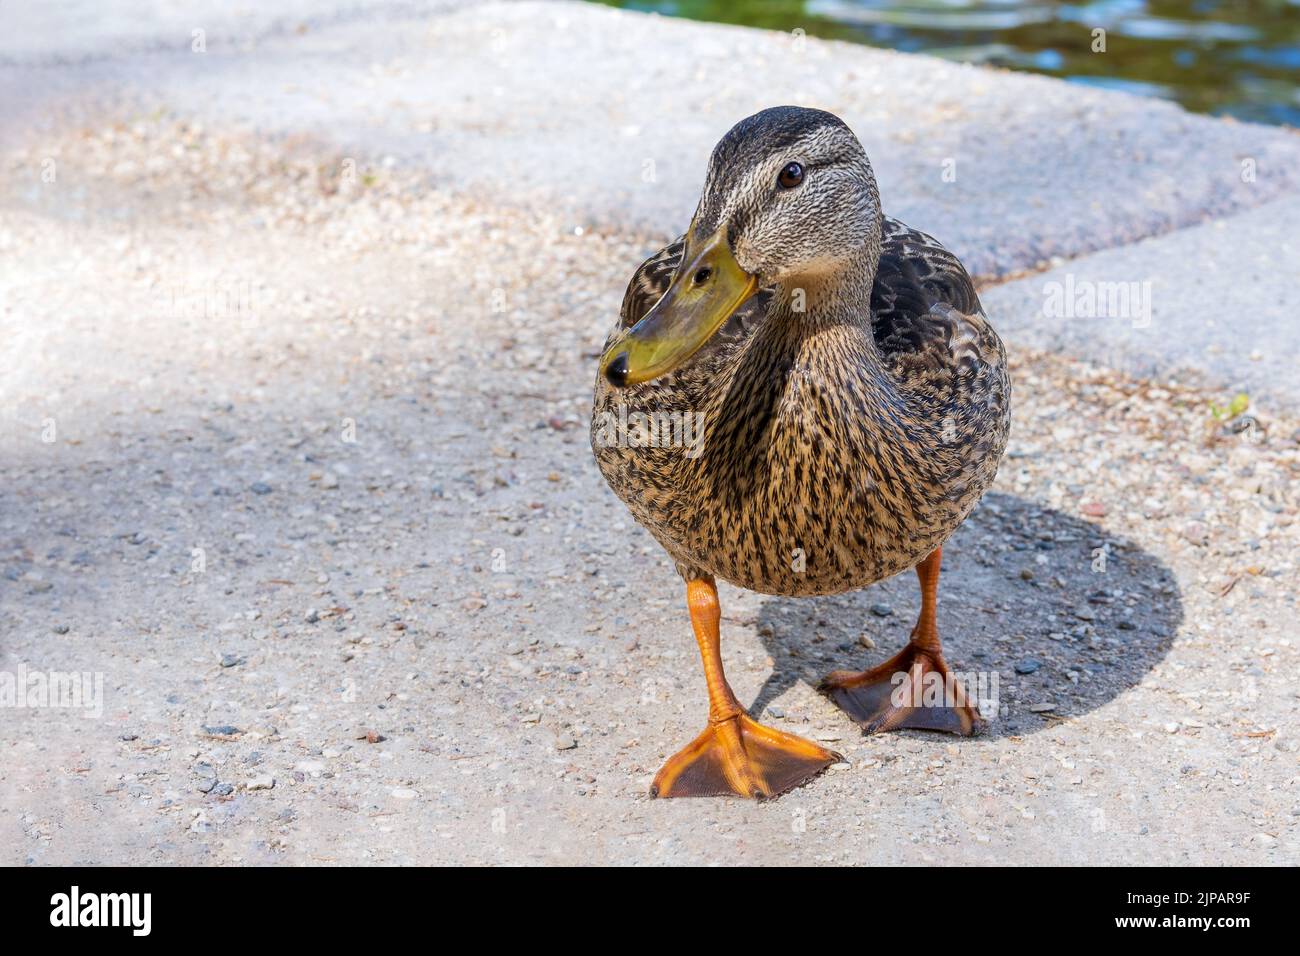 Female wild duck stands on the shore of a lake Stock Photo